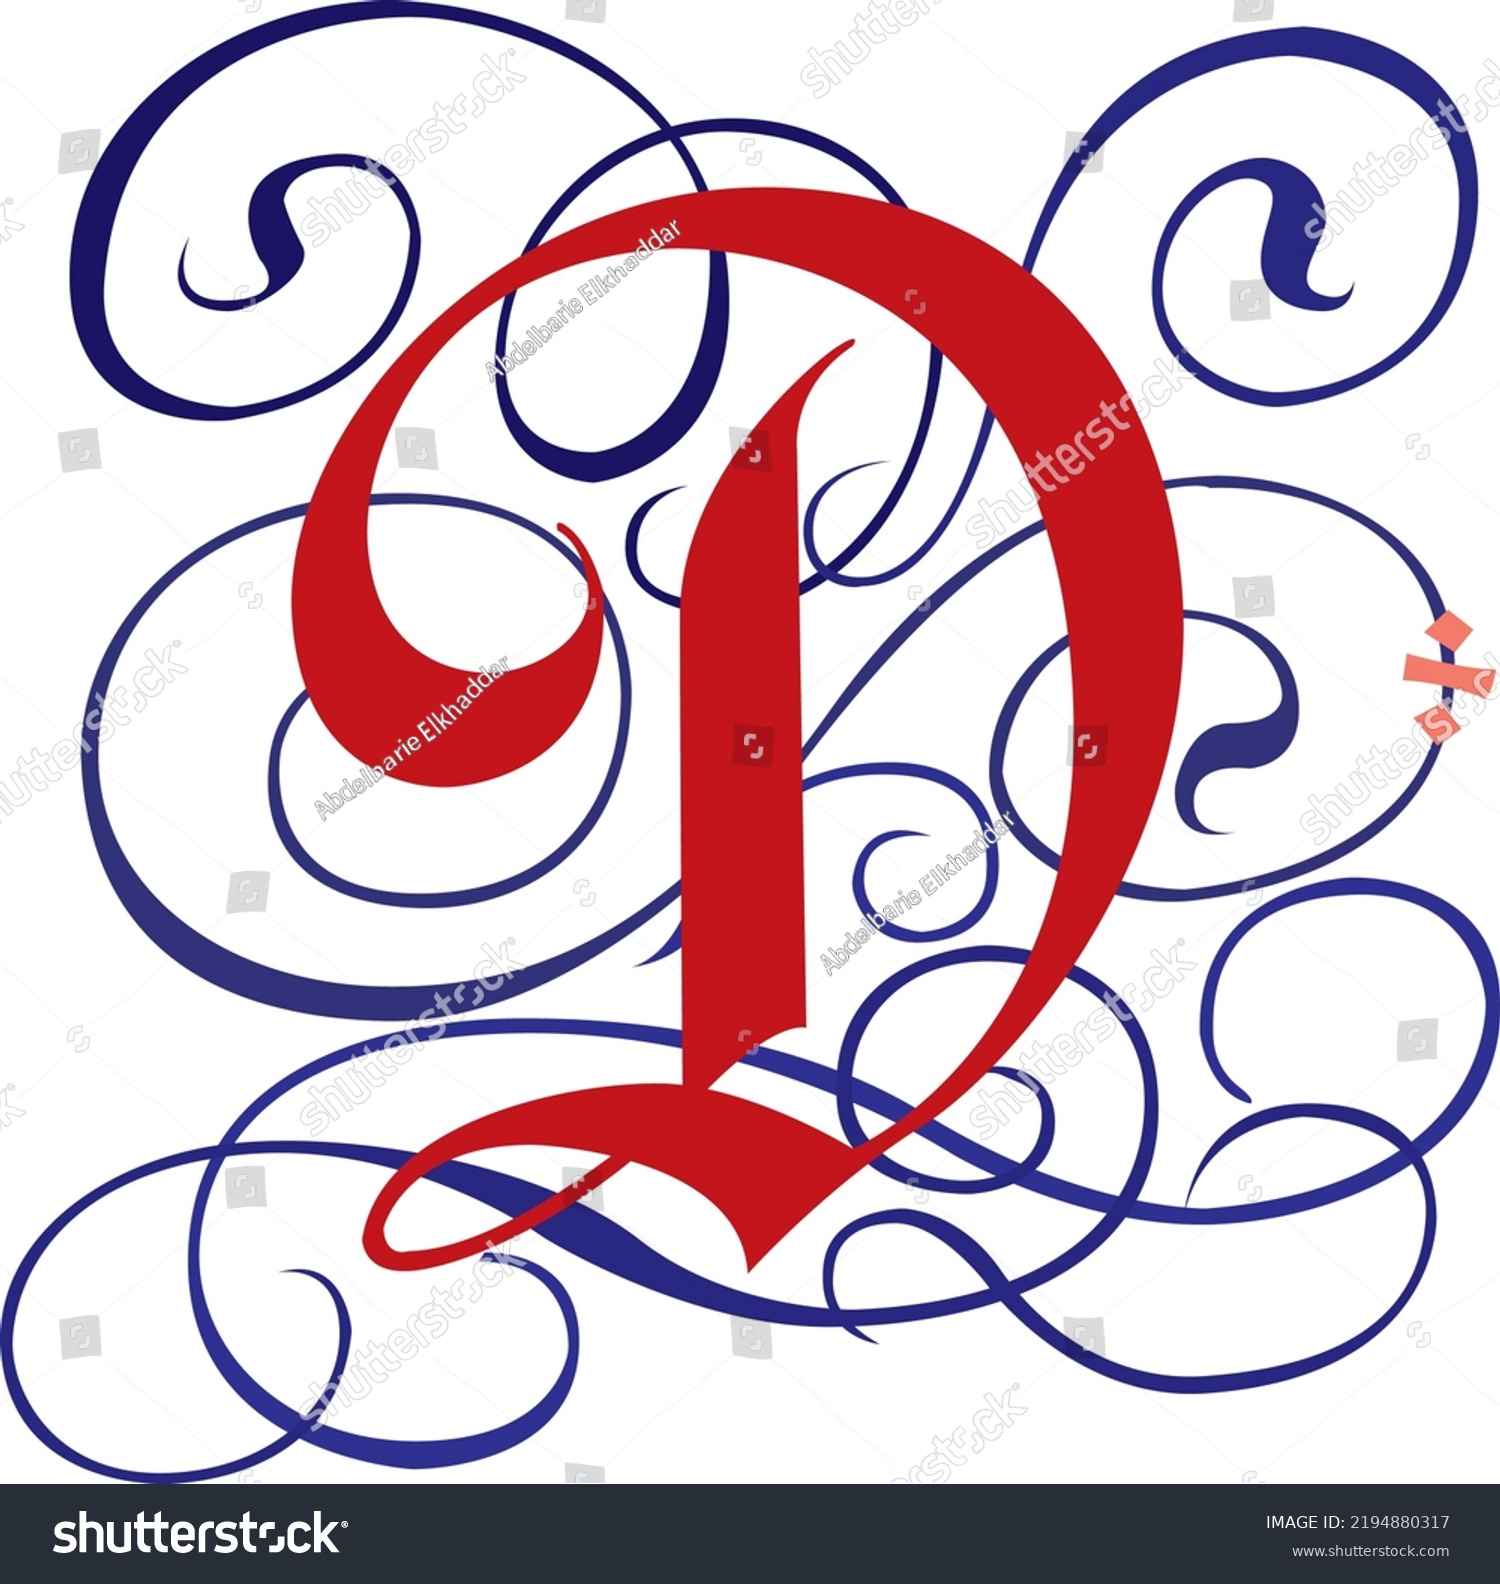 Gothic Letter D Scroll Design Red Stock Vector (Royalty Free ...